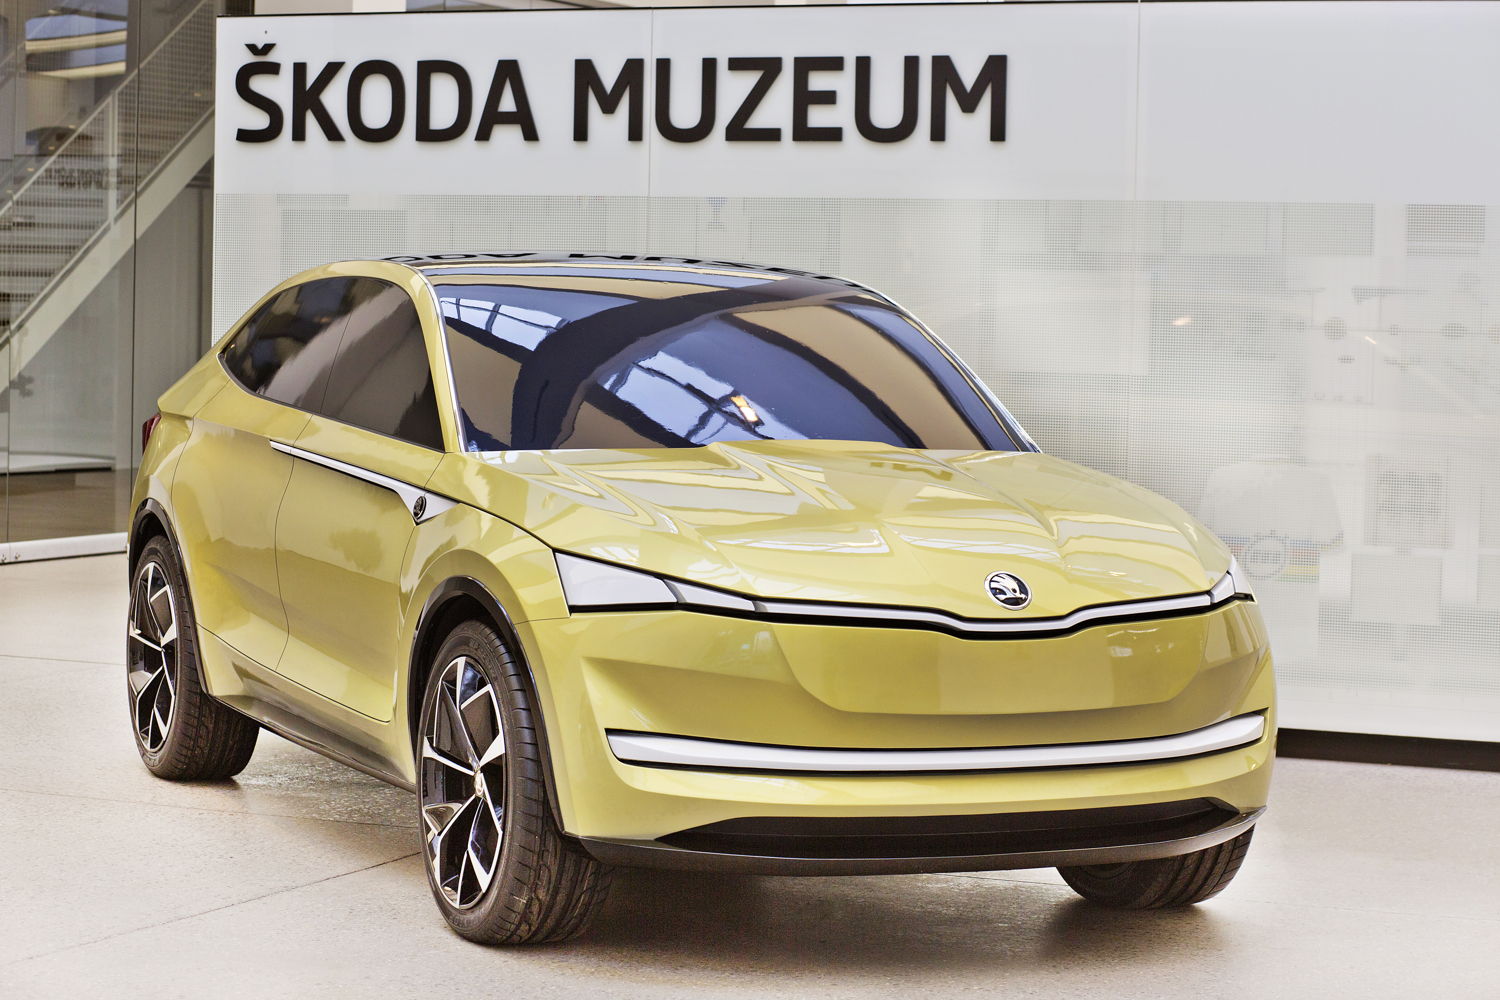 The ŠKODA VISION E model, exhibited at the ŠKODA Museum, has been produced from special clay and corresponds in size and detail to the exhibit on show at the same time at Auto Shanghai.